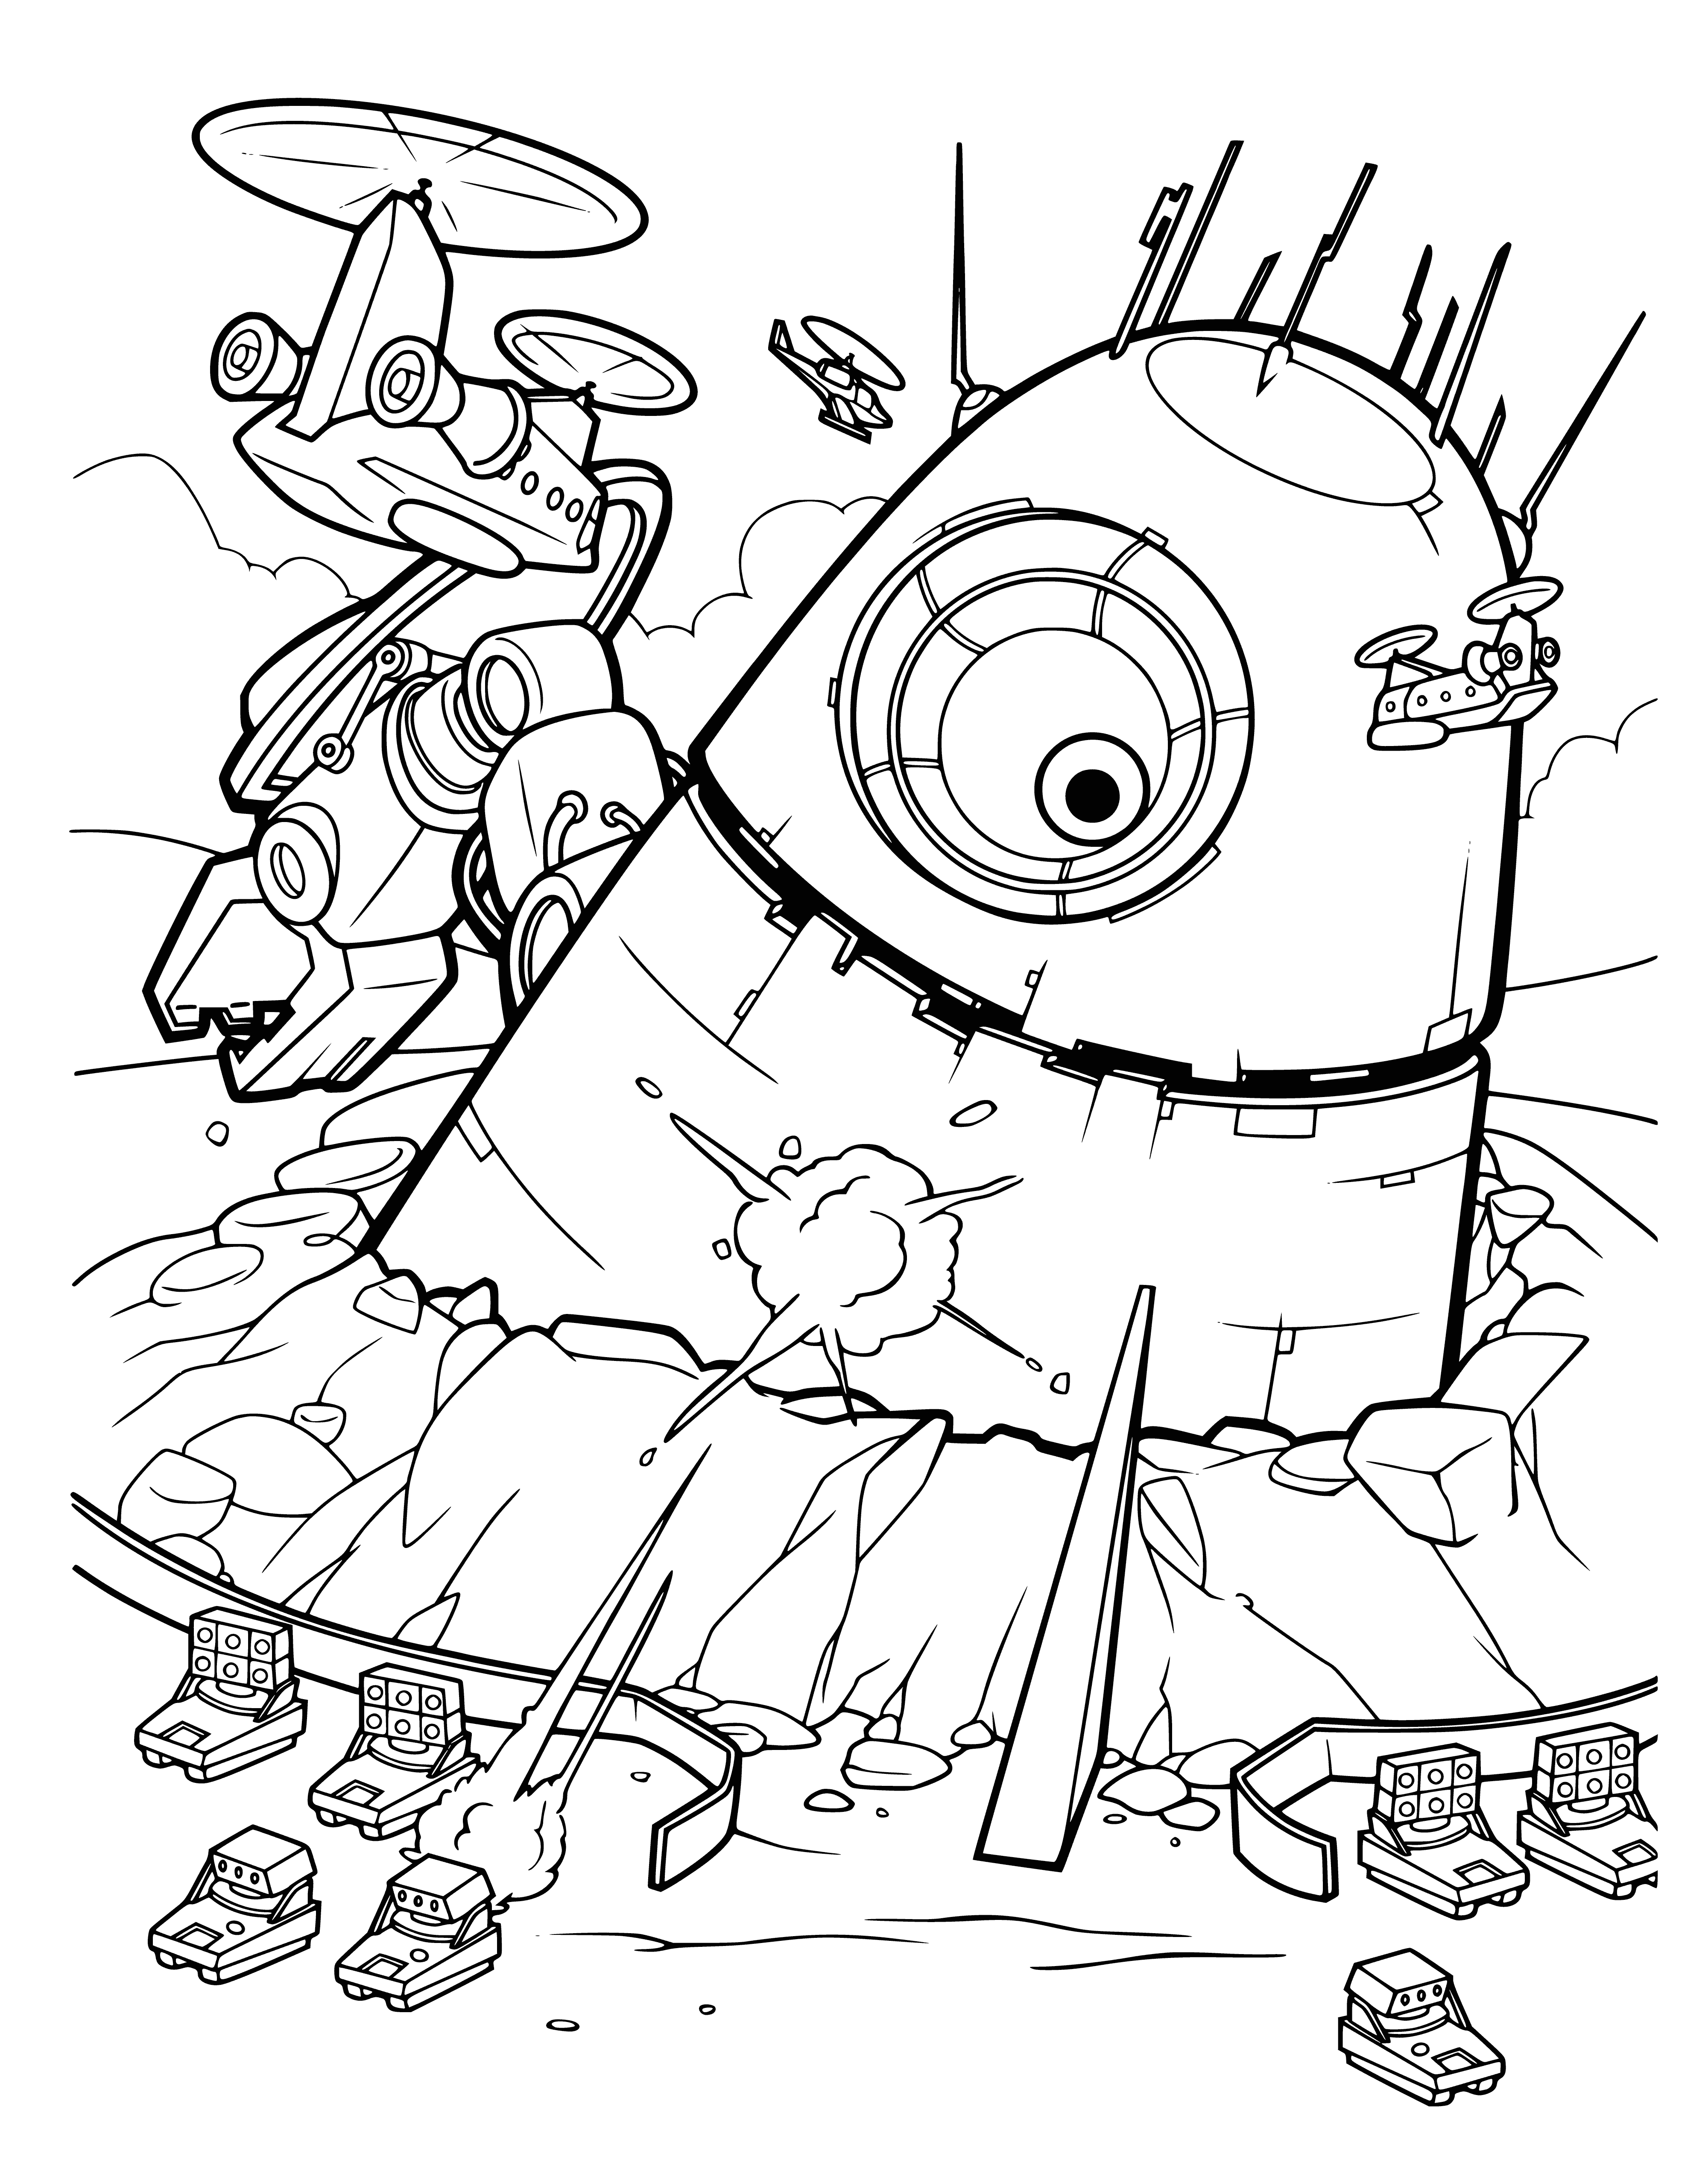 Huge robot coloring page